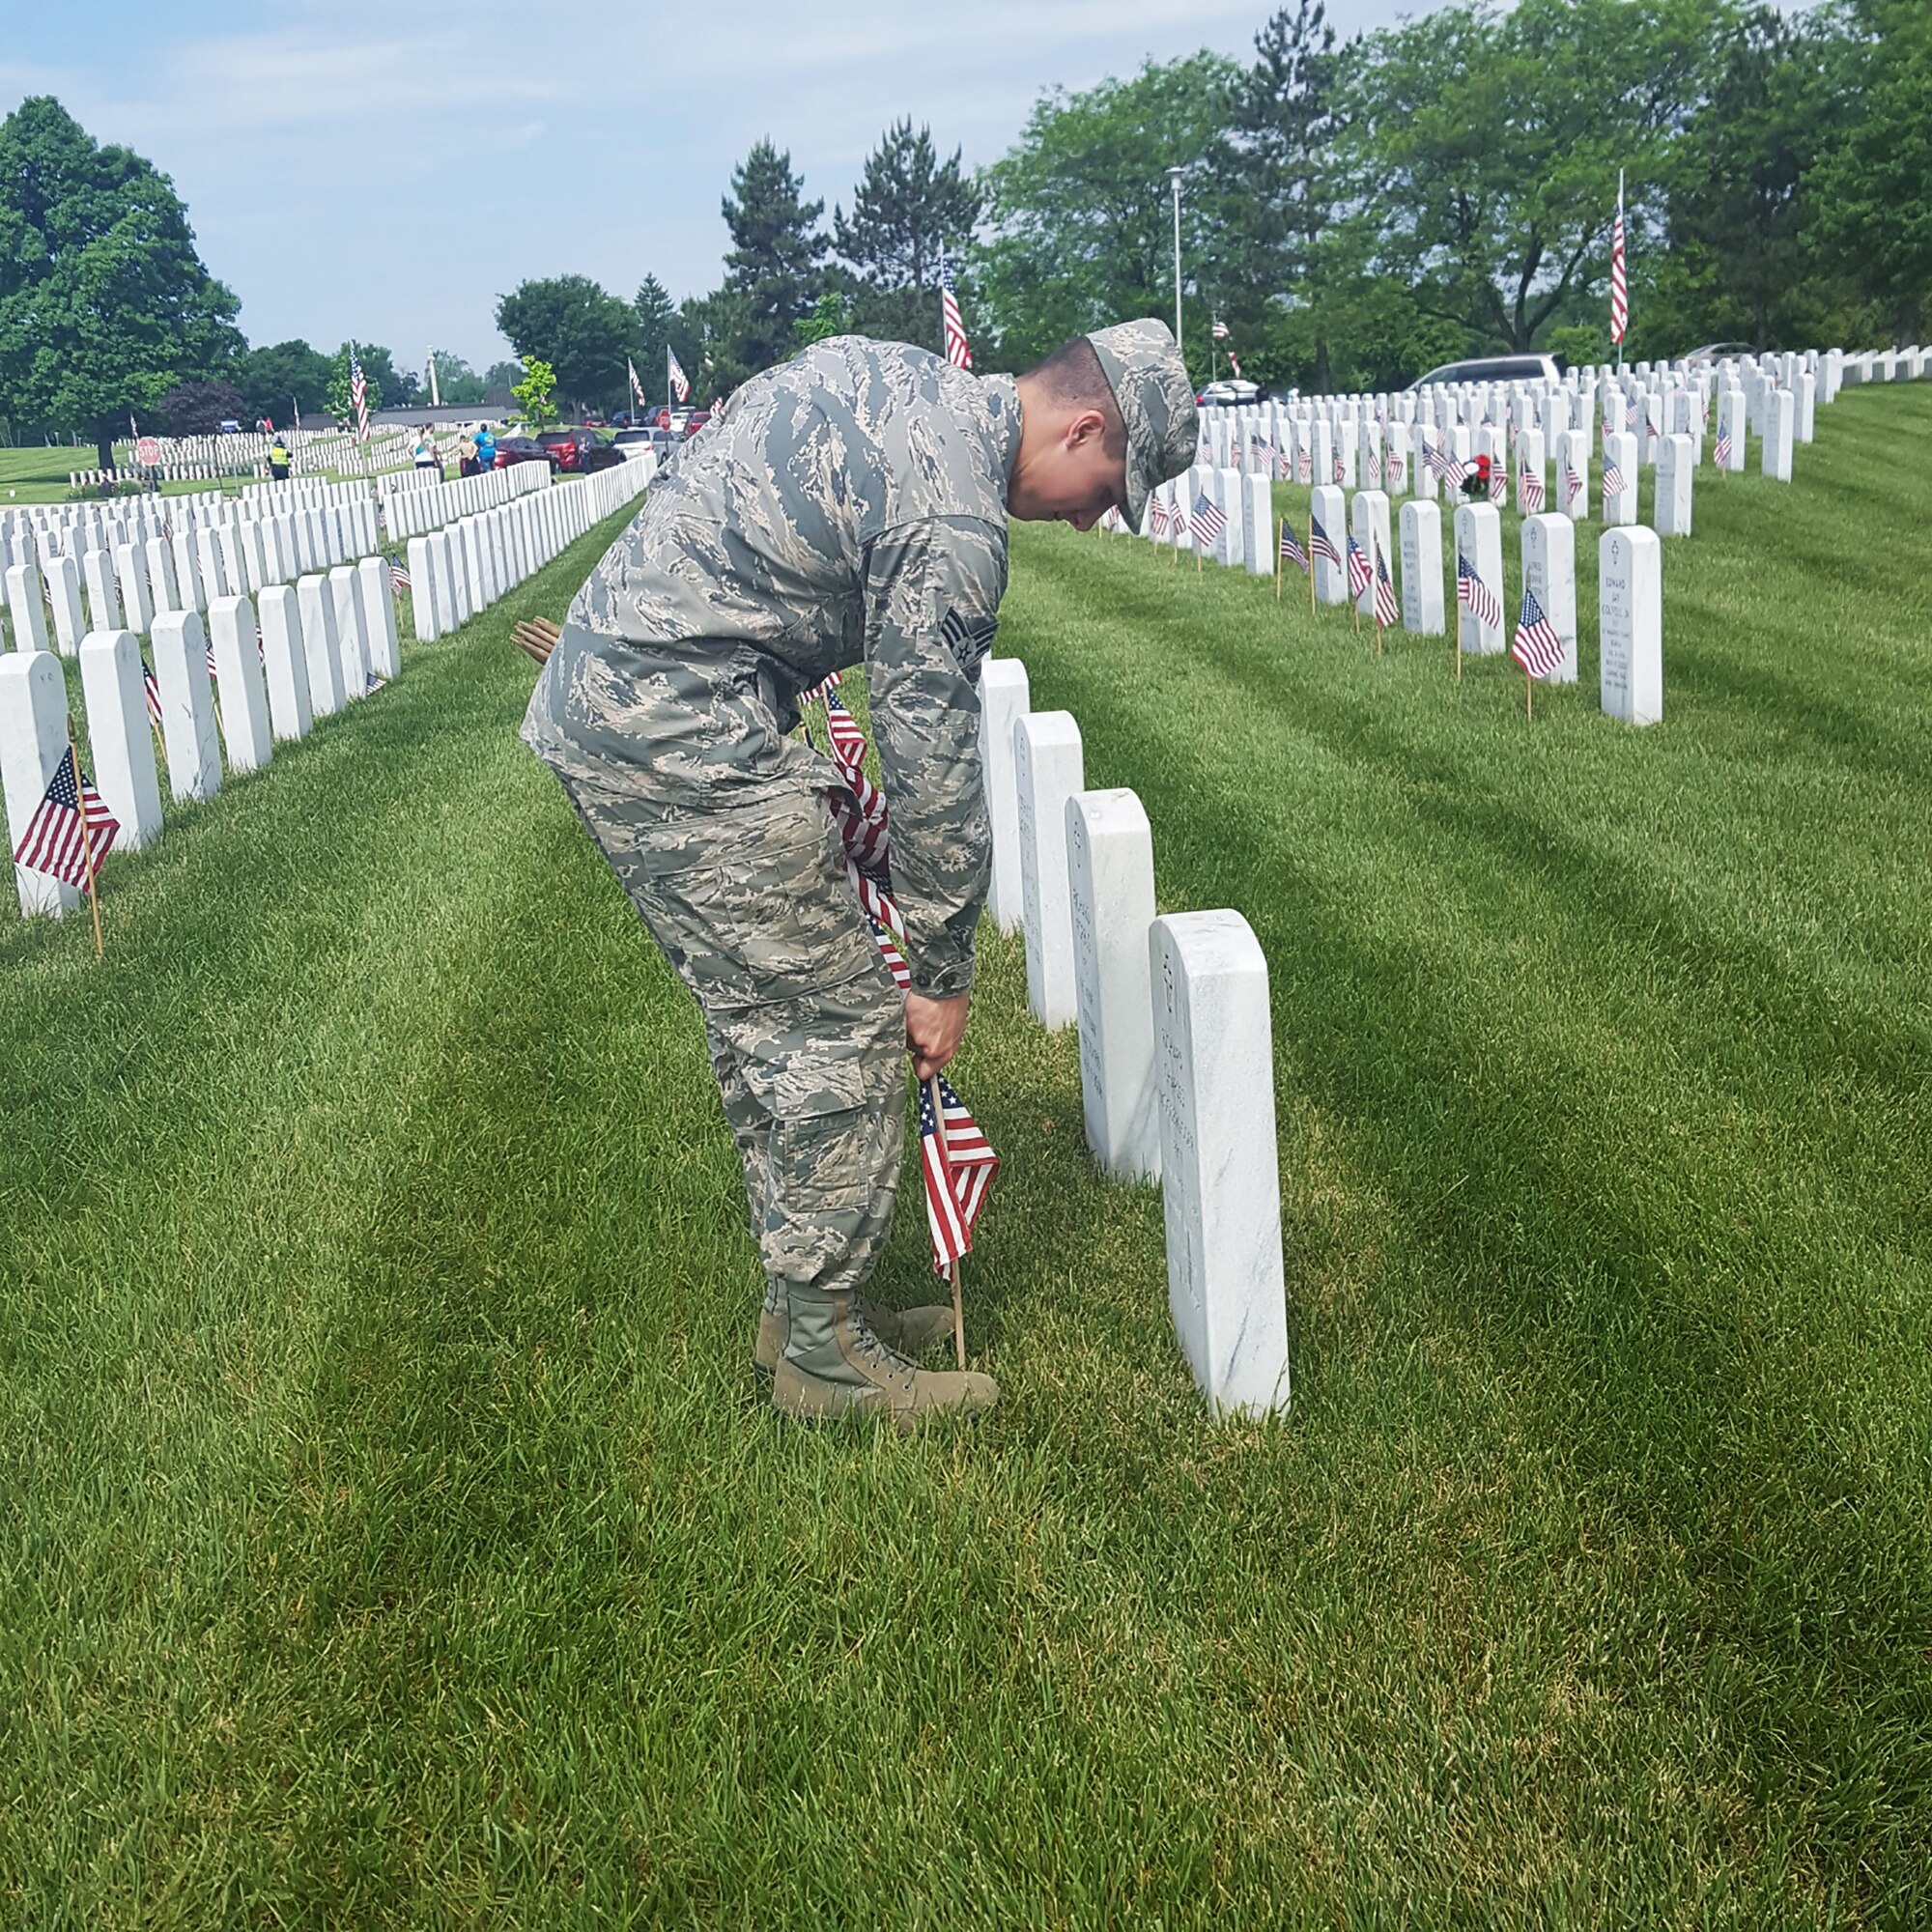 Senior Airman Millar, assigned to the 14th Intelligence Squadron, 655th Intelligence, Surveillance and Reconnaissance Group, plants an American flag on the grave of a servicemember during a Memorial Day service at the Dayton Veteran's Cemetery, Dayton, Ohio, May 28, 2018.